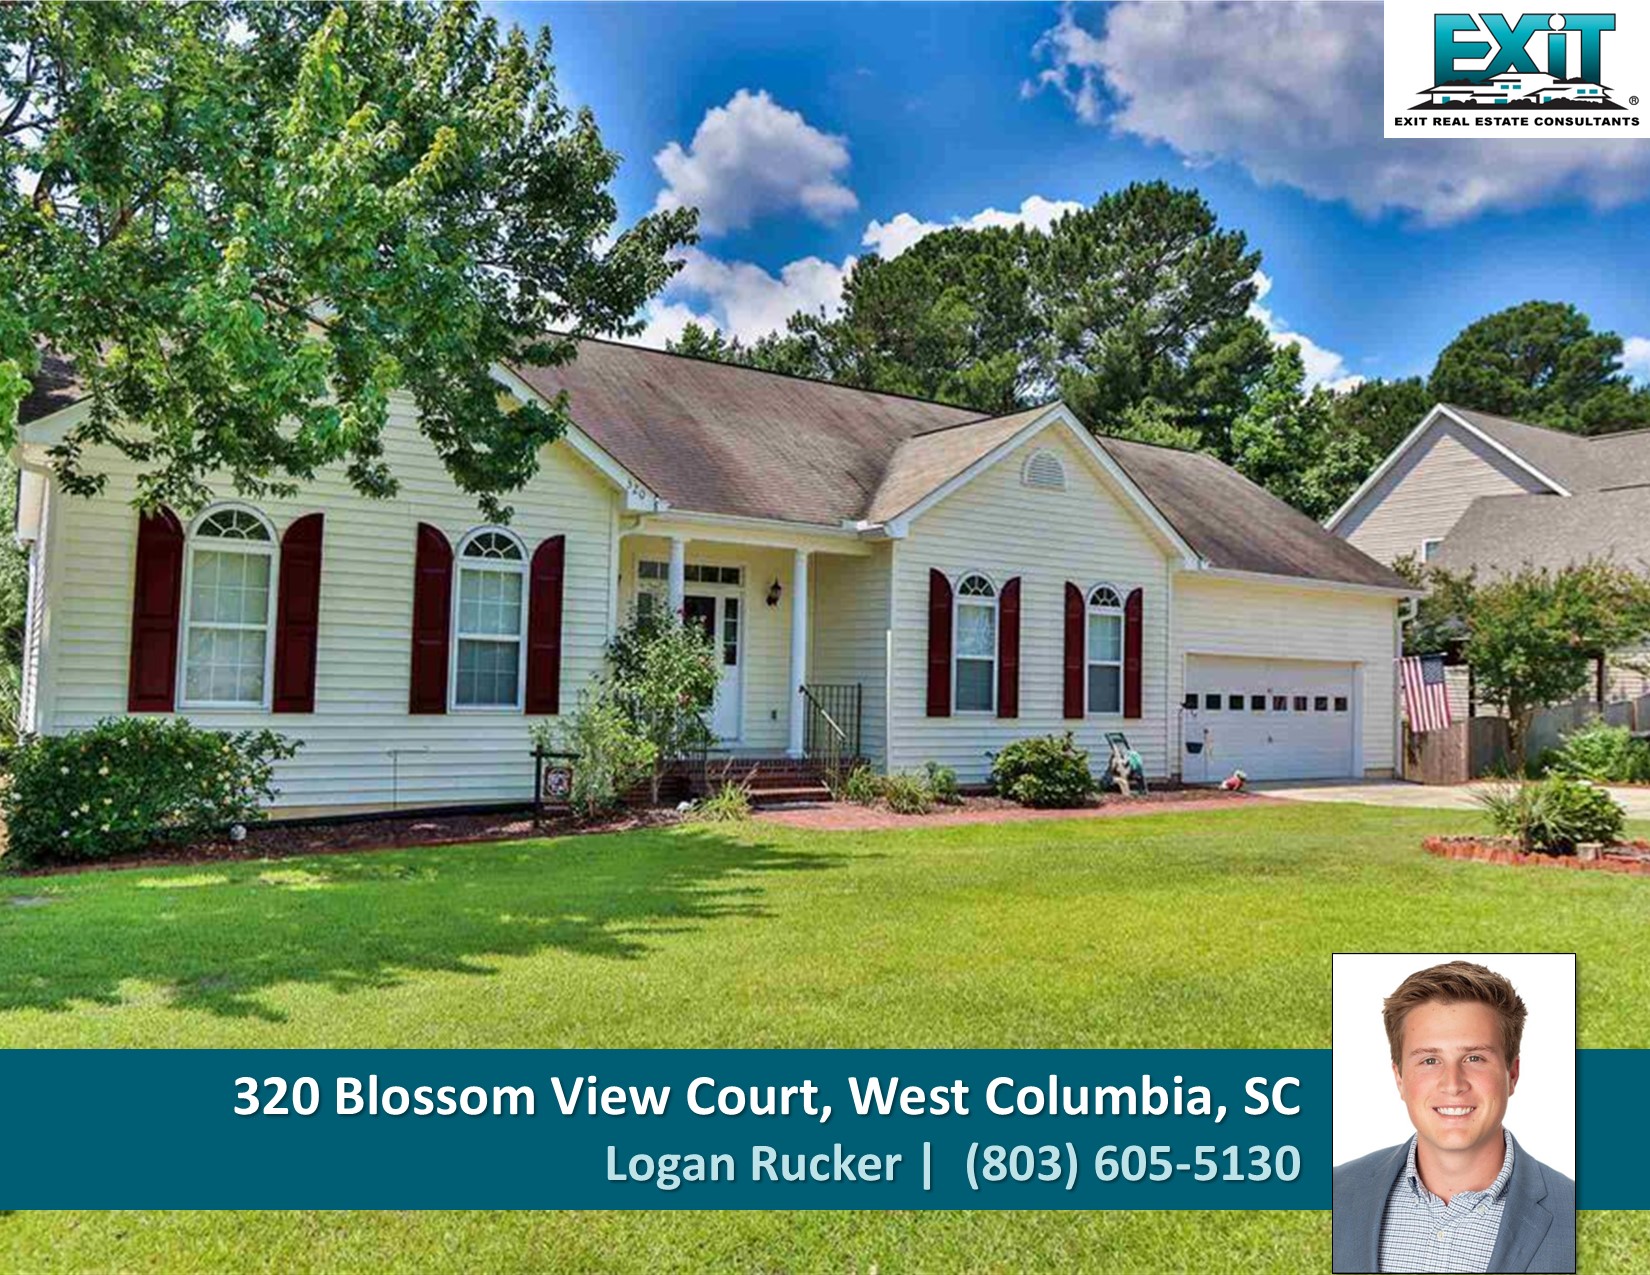 Just listed in Magnolia Ridge